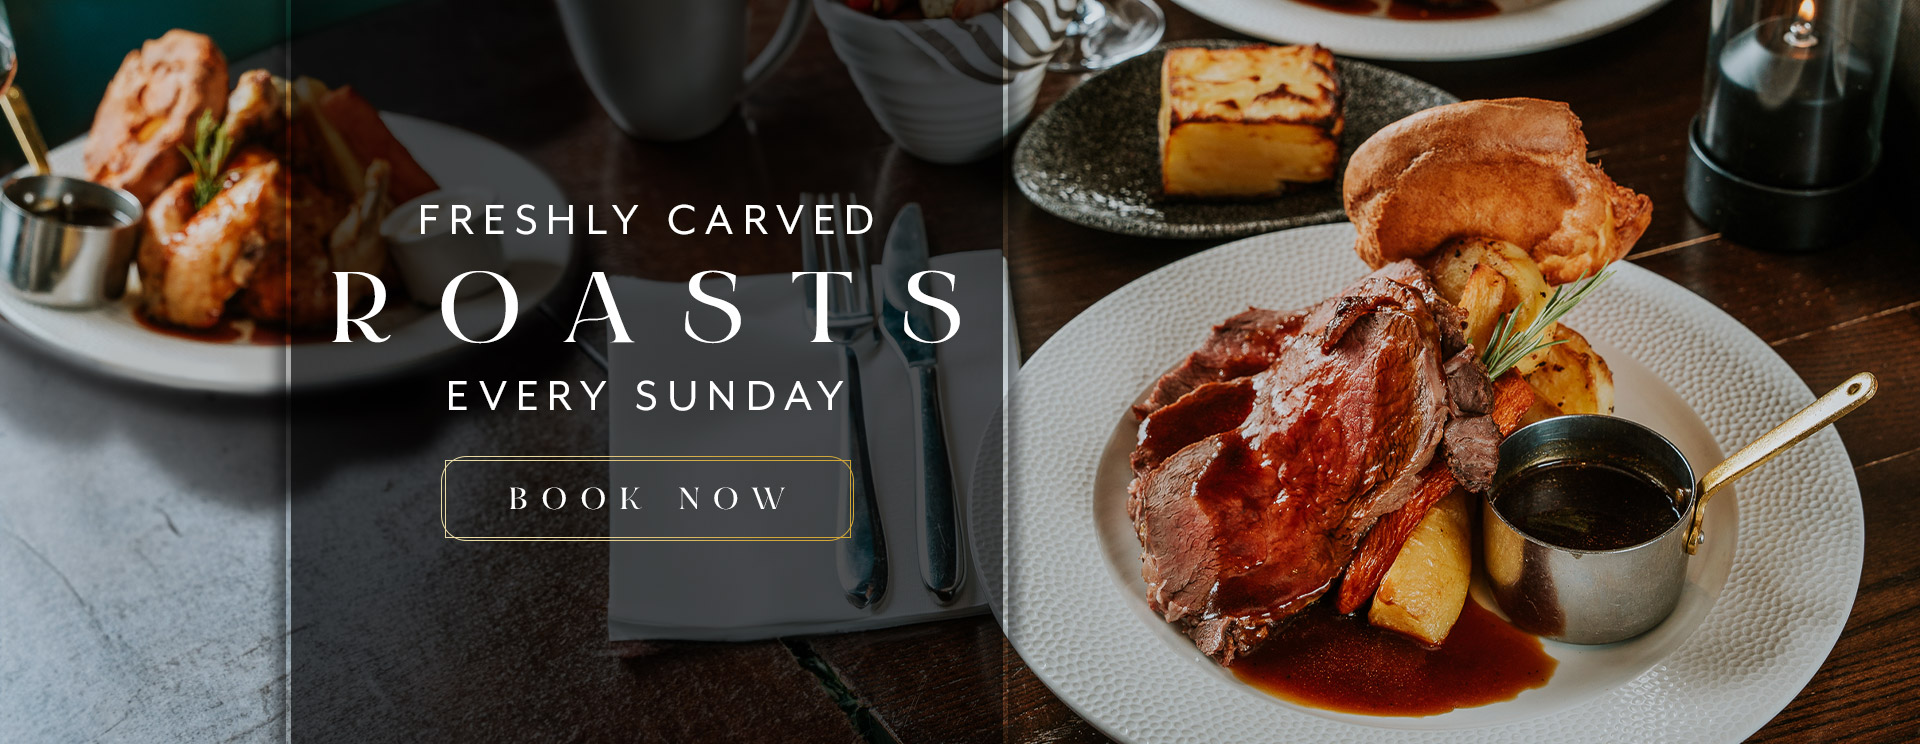 Sunday Lunch at The Crown